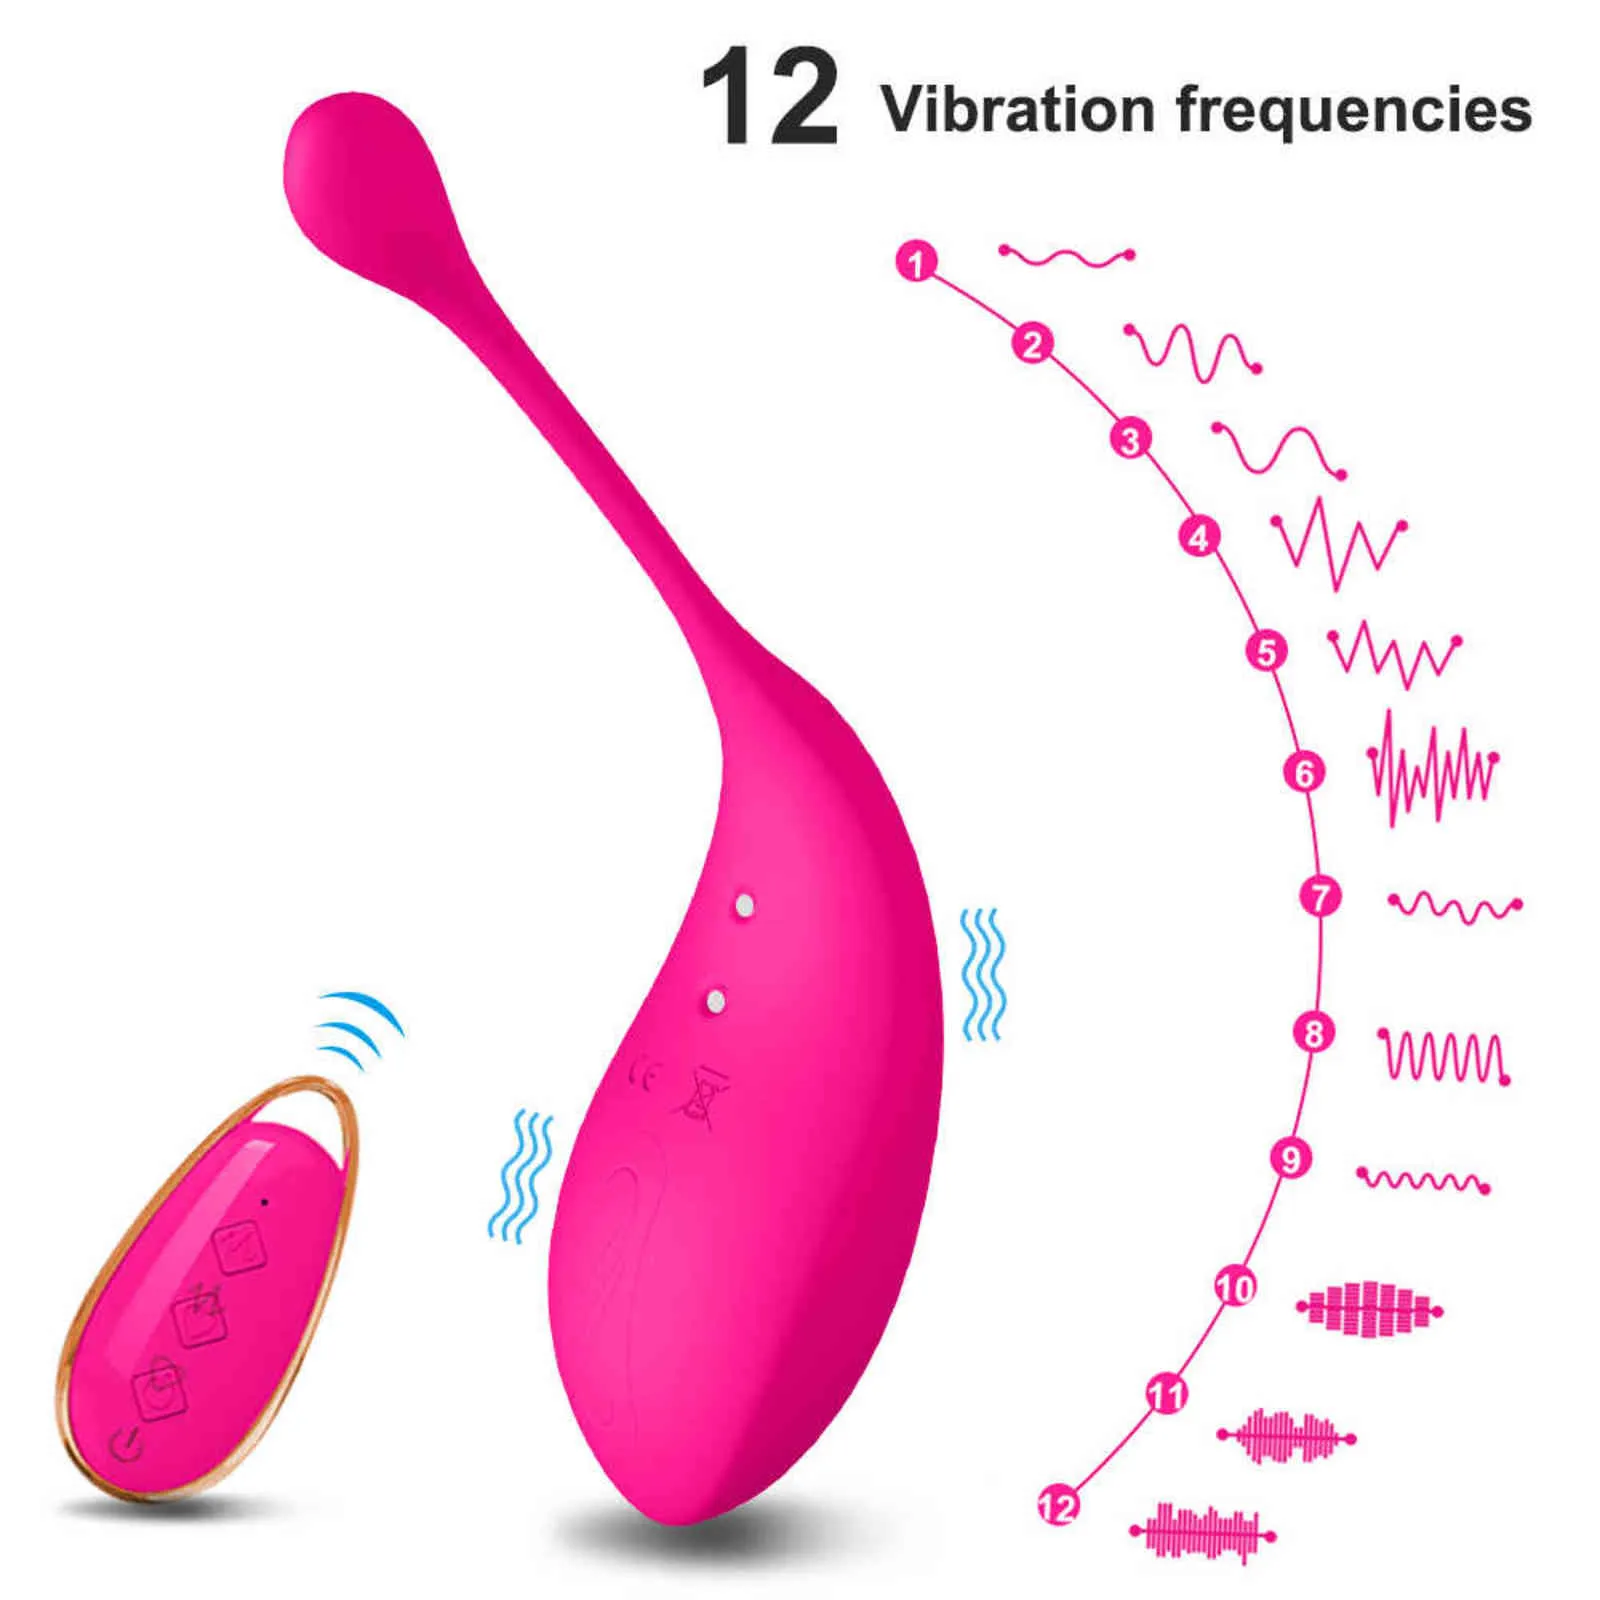 NXYVibrator Wireless Remote Control Vibrating Egg Female Wearable Powerful G-Spot Vibrator Love Jump Sex Toys Goods for Adults 18 Women 1123